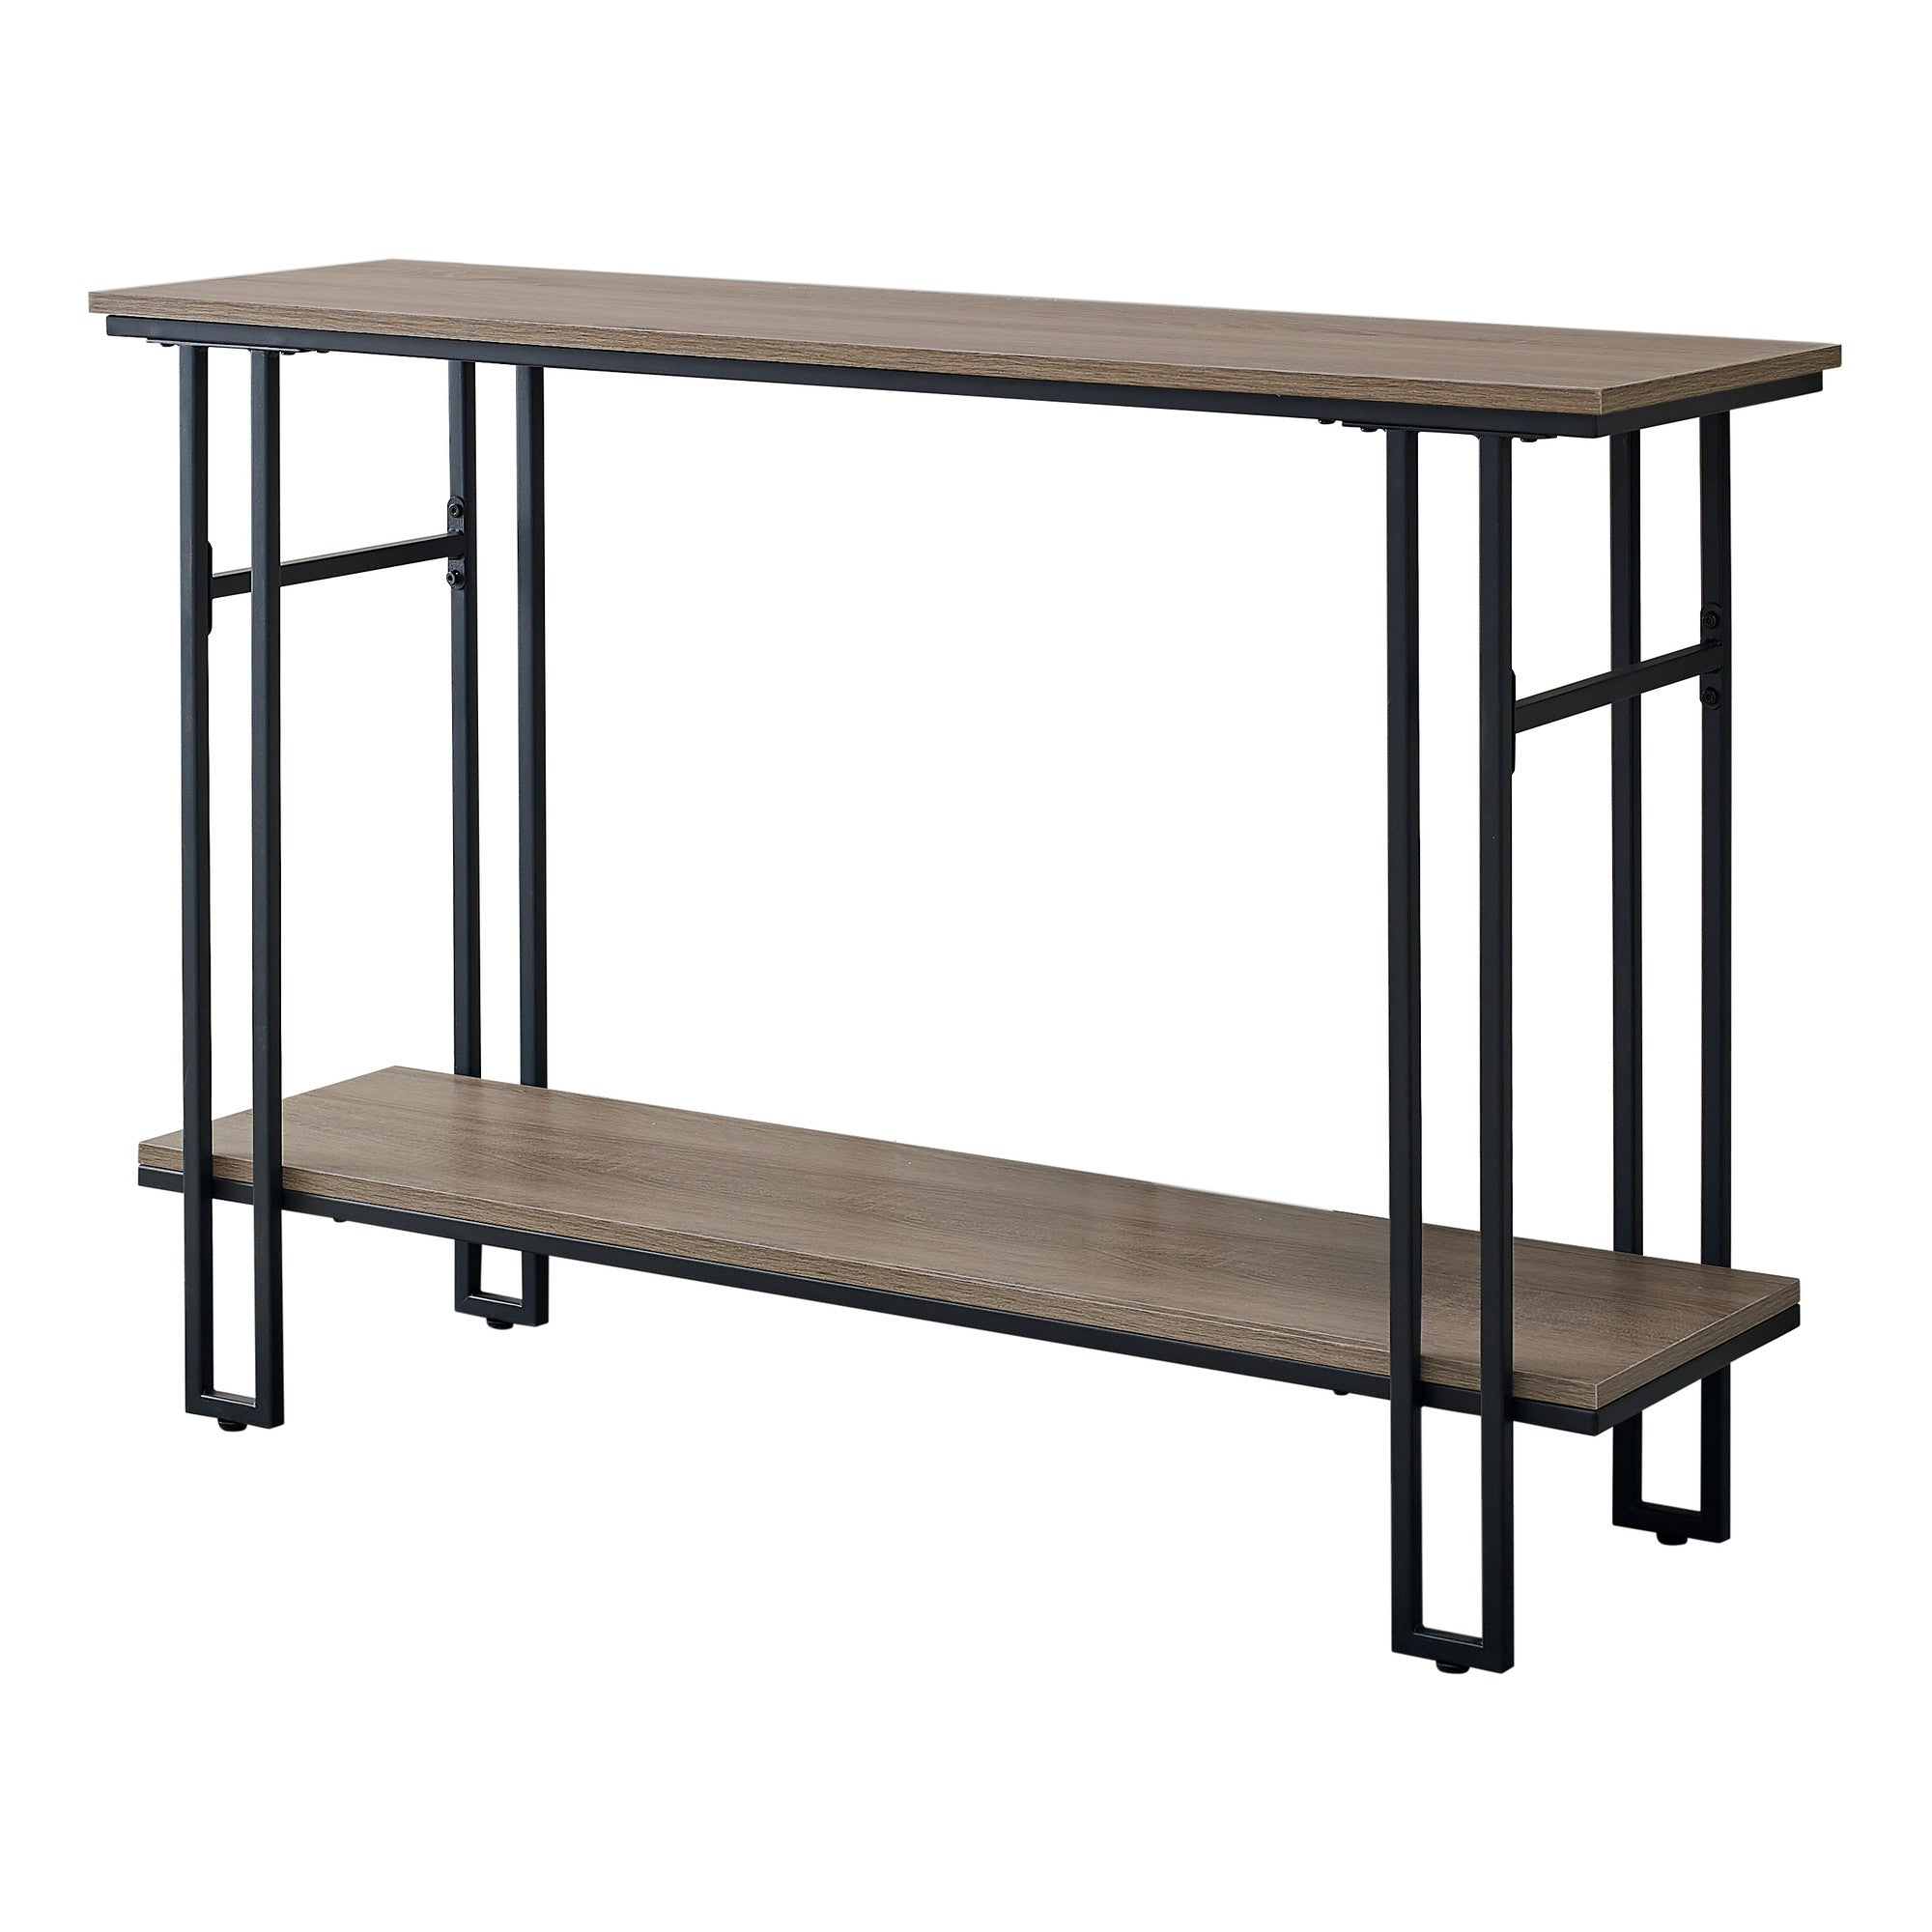 47" Taupe And Black Frame Console Table With Storage